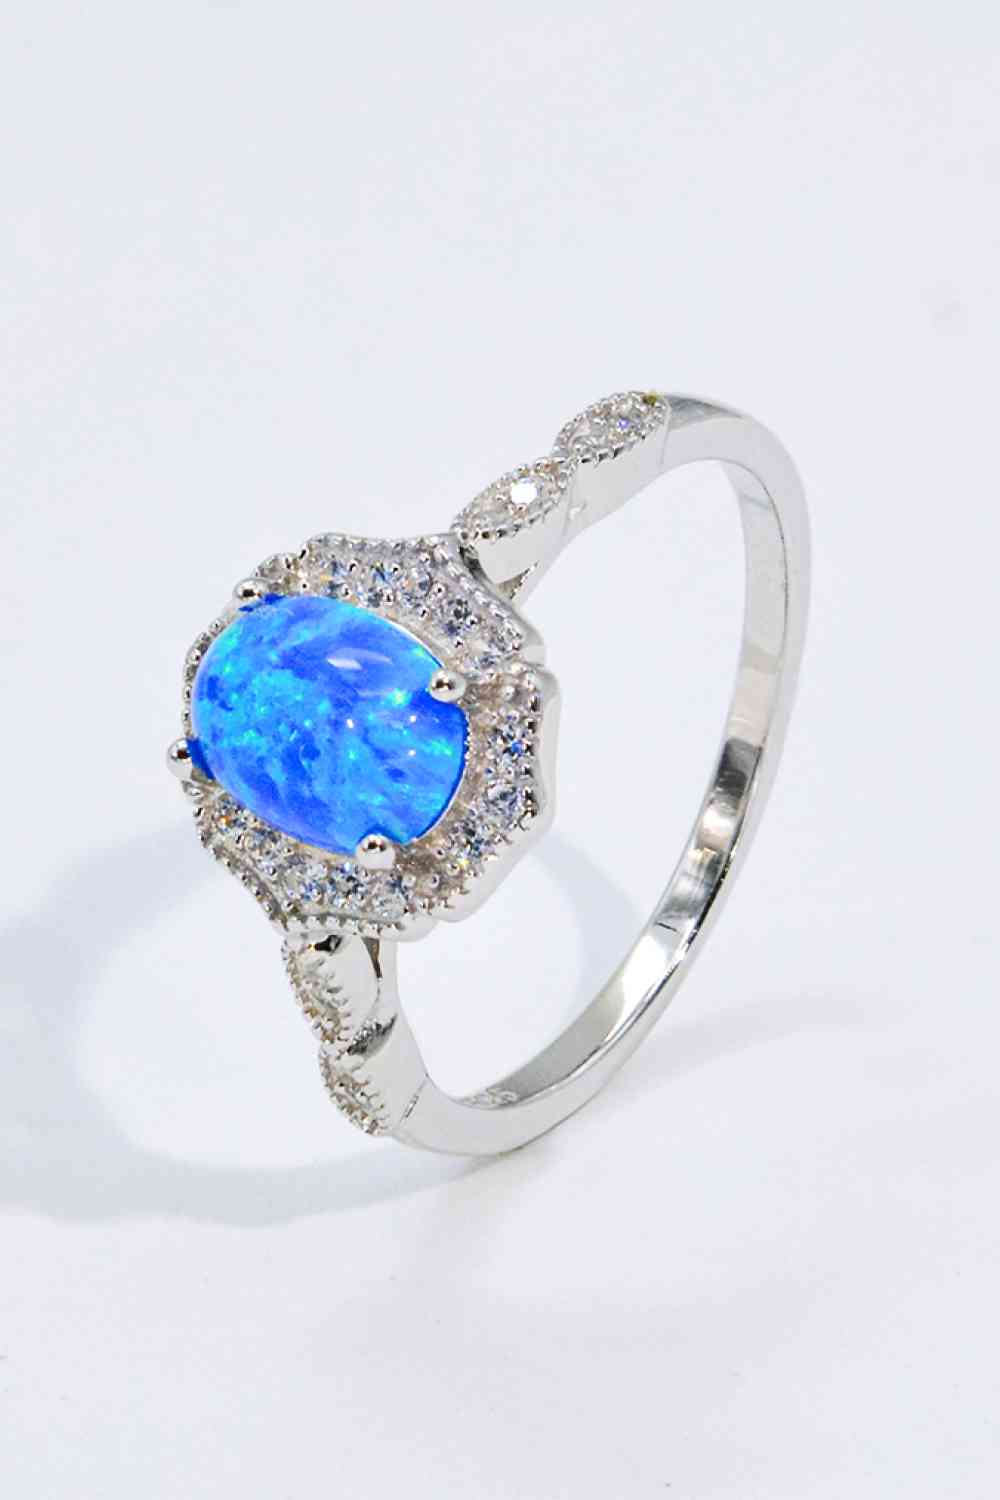 Opal and Zircon 925 Sterling Silver Ring Blue